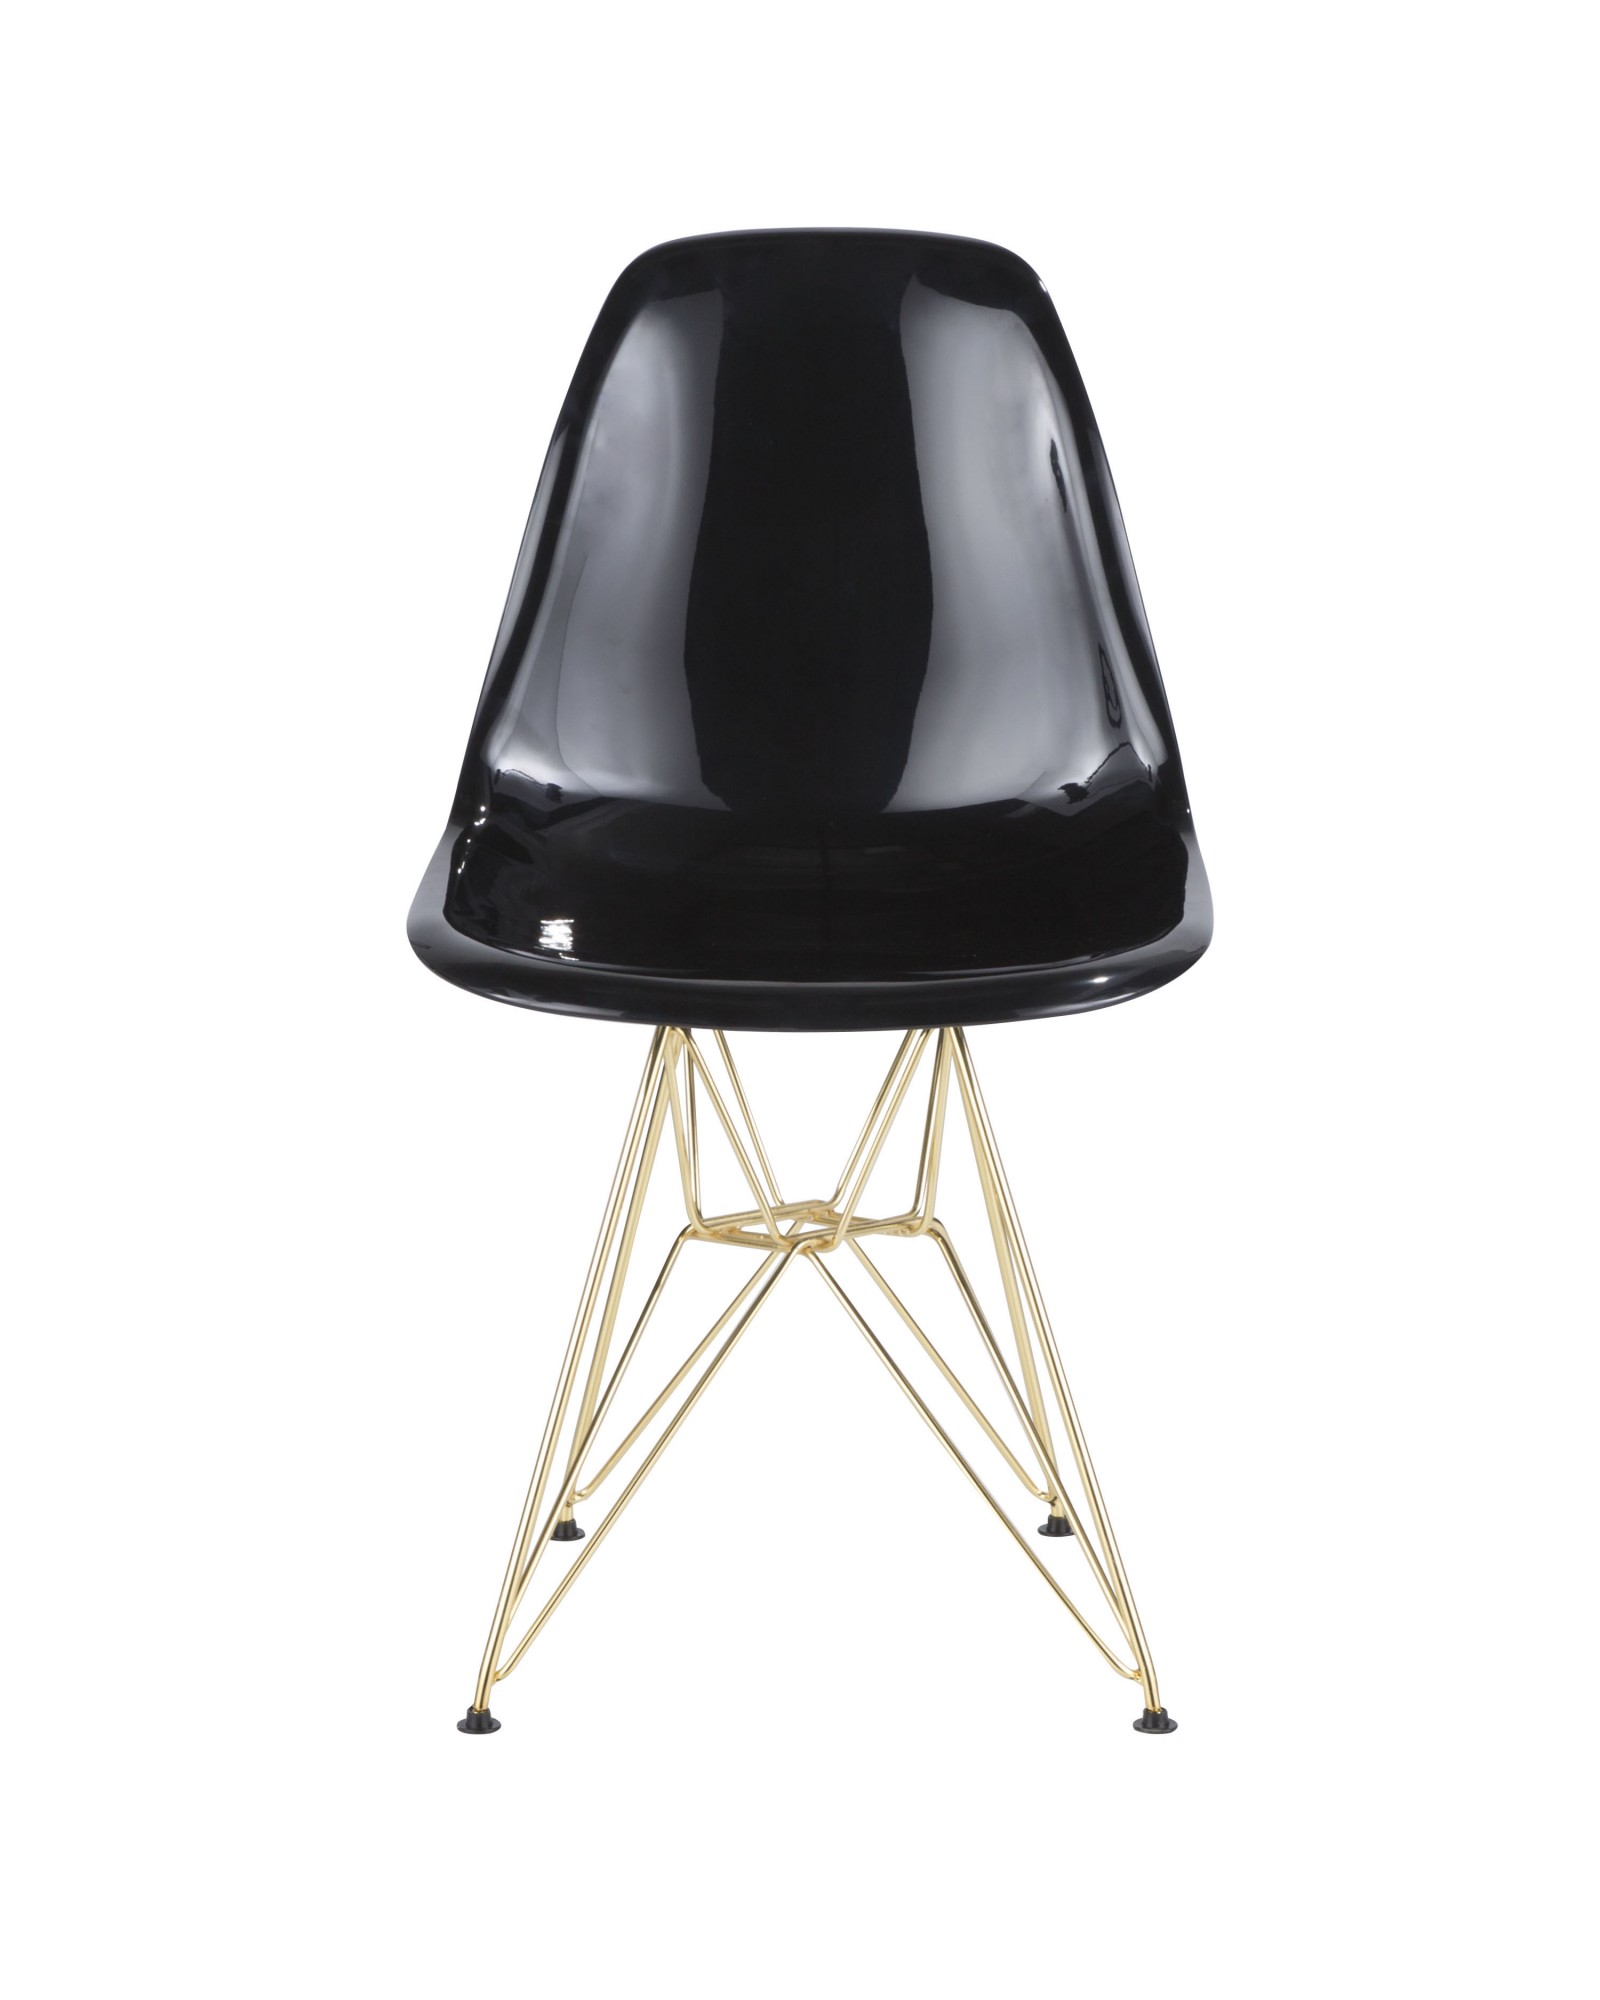 Brady Mid-Century Modern Dining/Accent Chair in Gold and Black -Set of 2